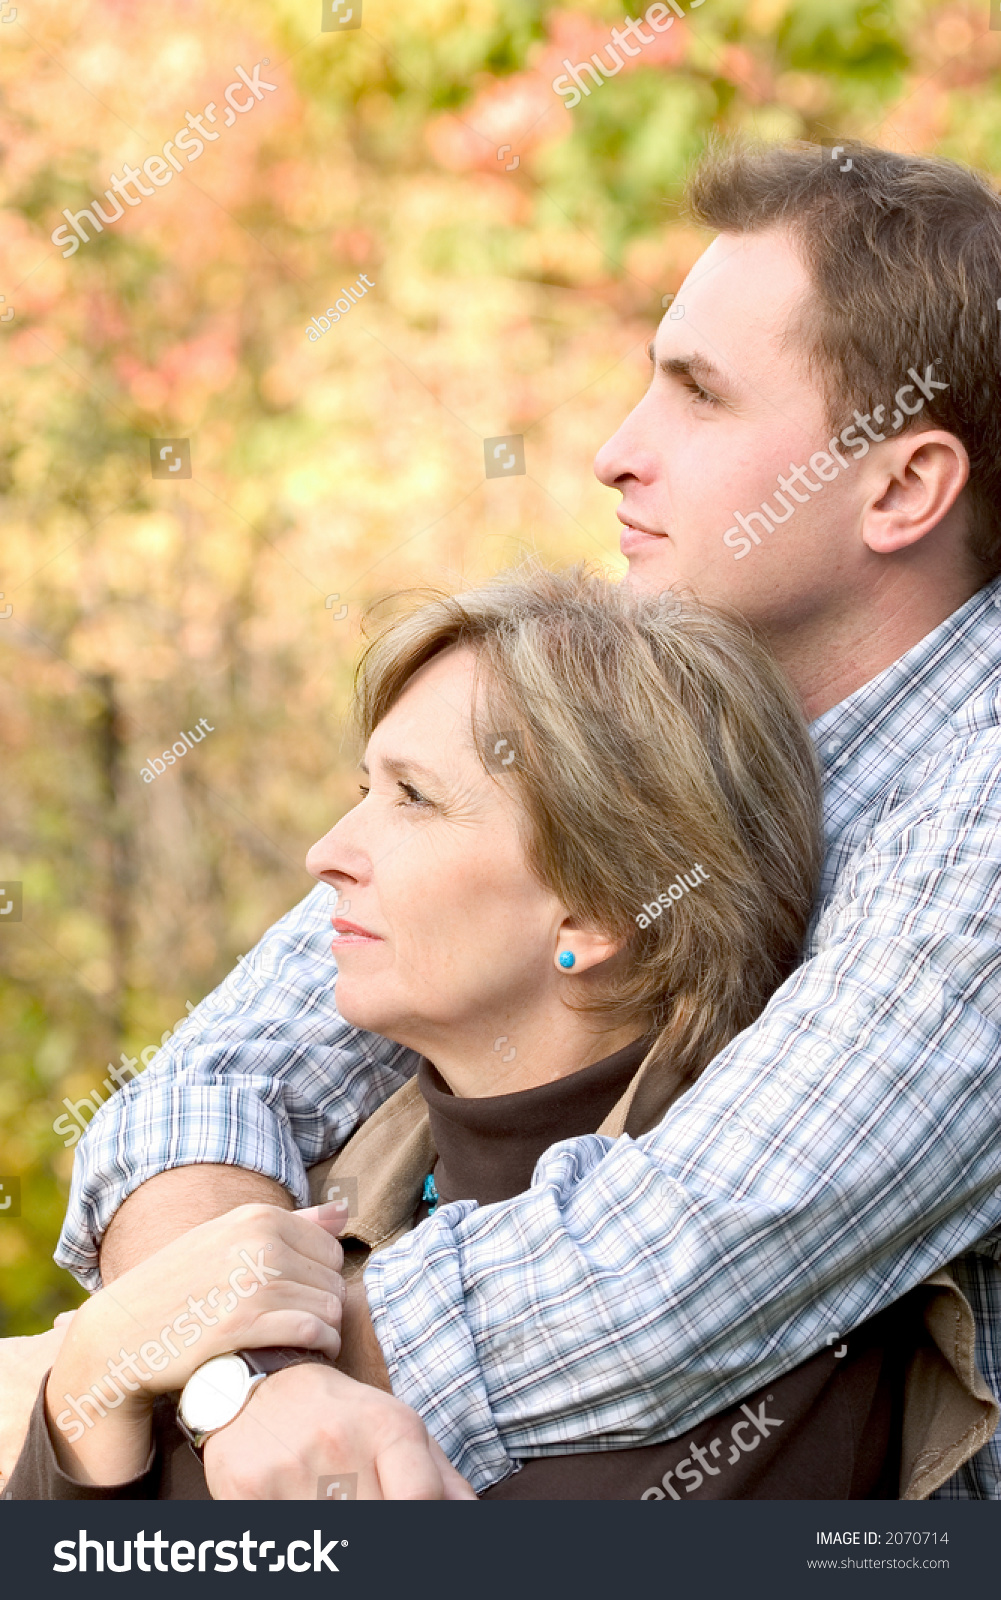 Adult Son Hugging His Mother Stock Photo Shutterstock